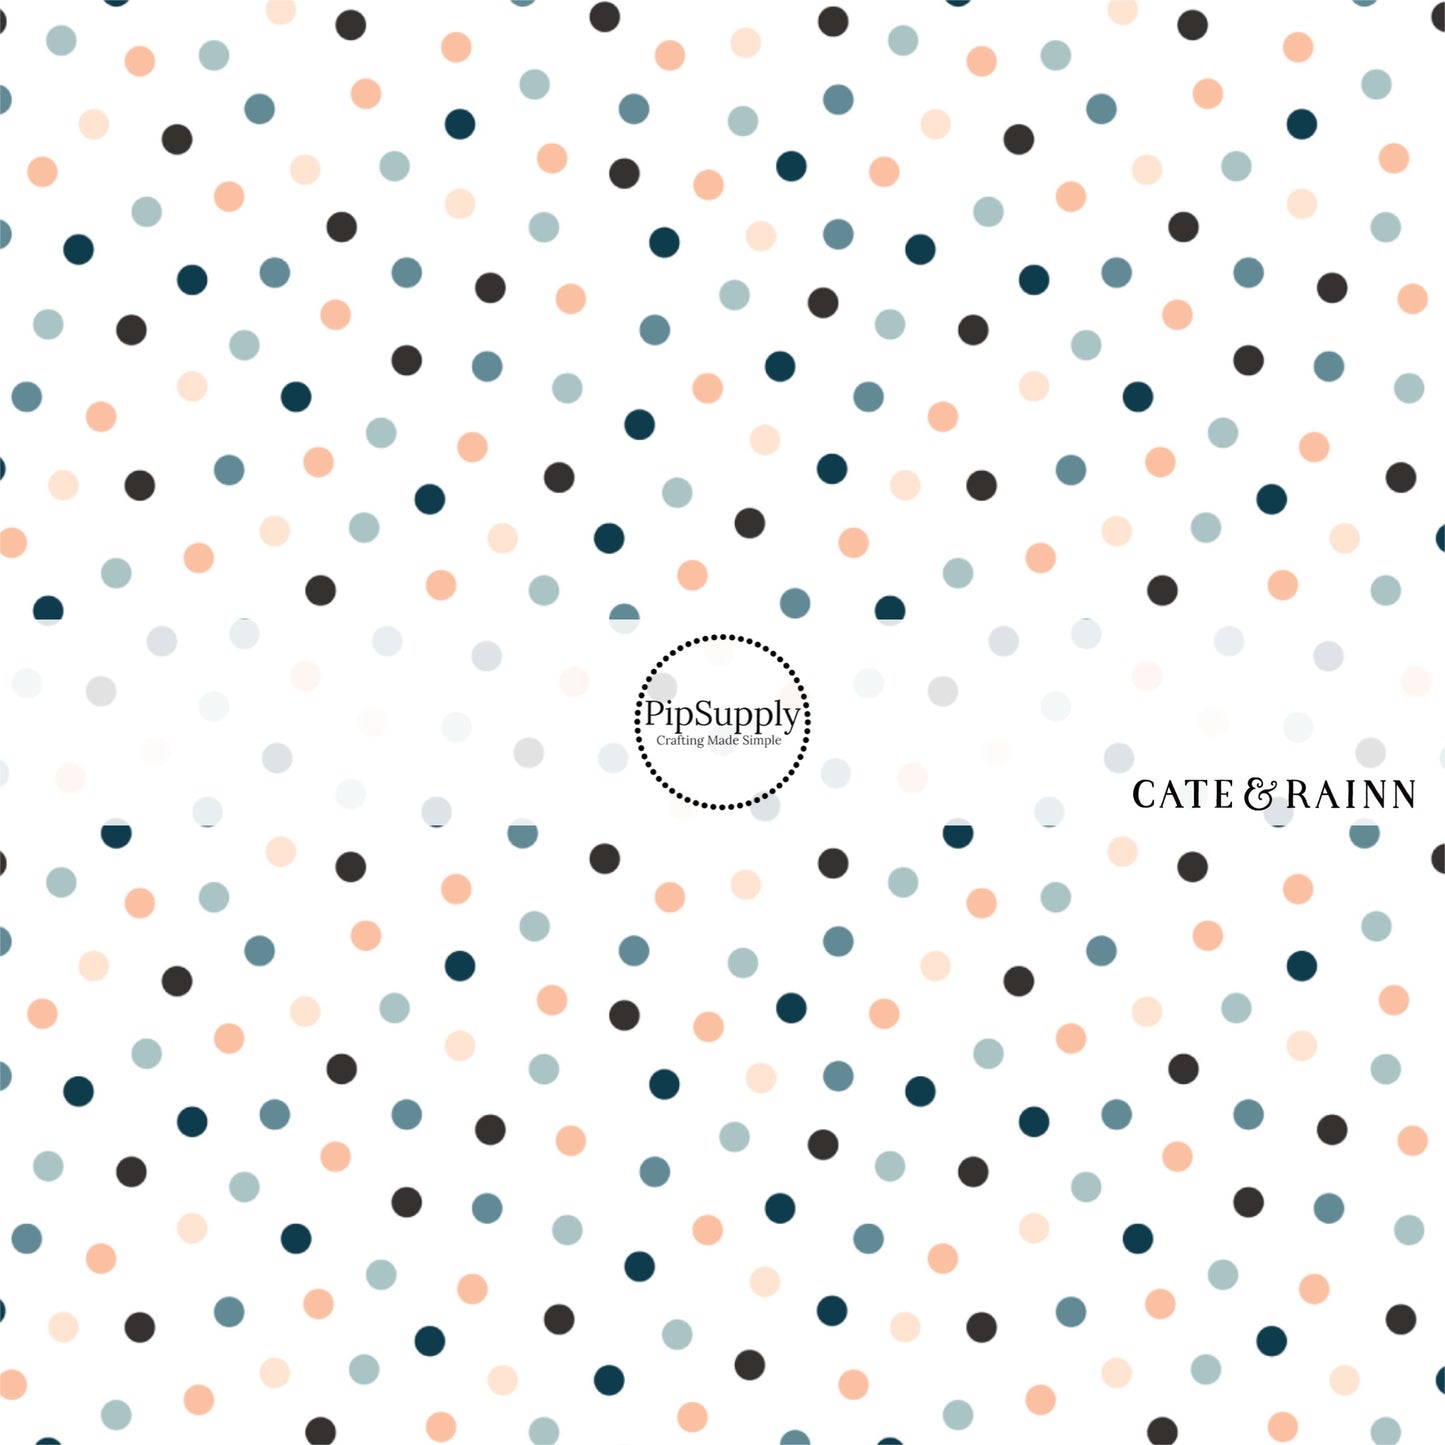 White fabric by the yard with navy blue, peach, and teal dots